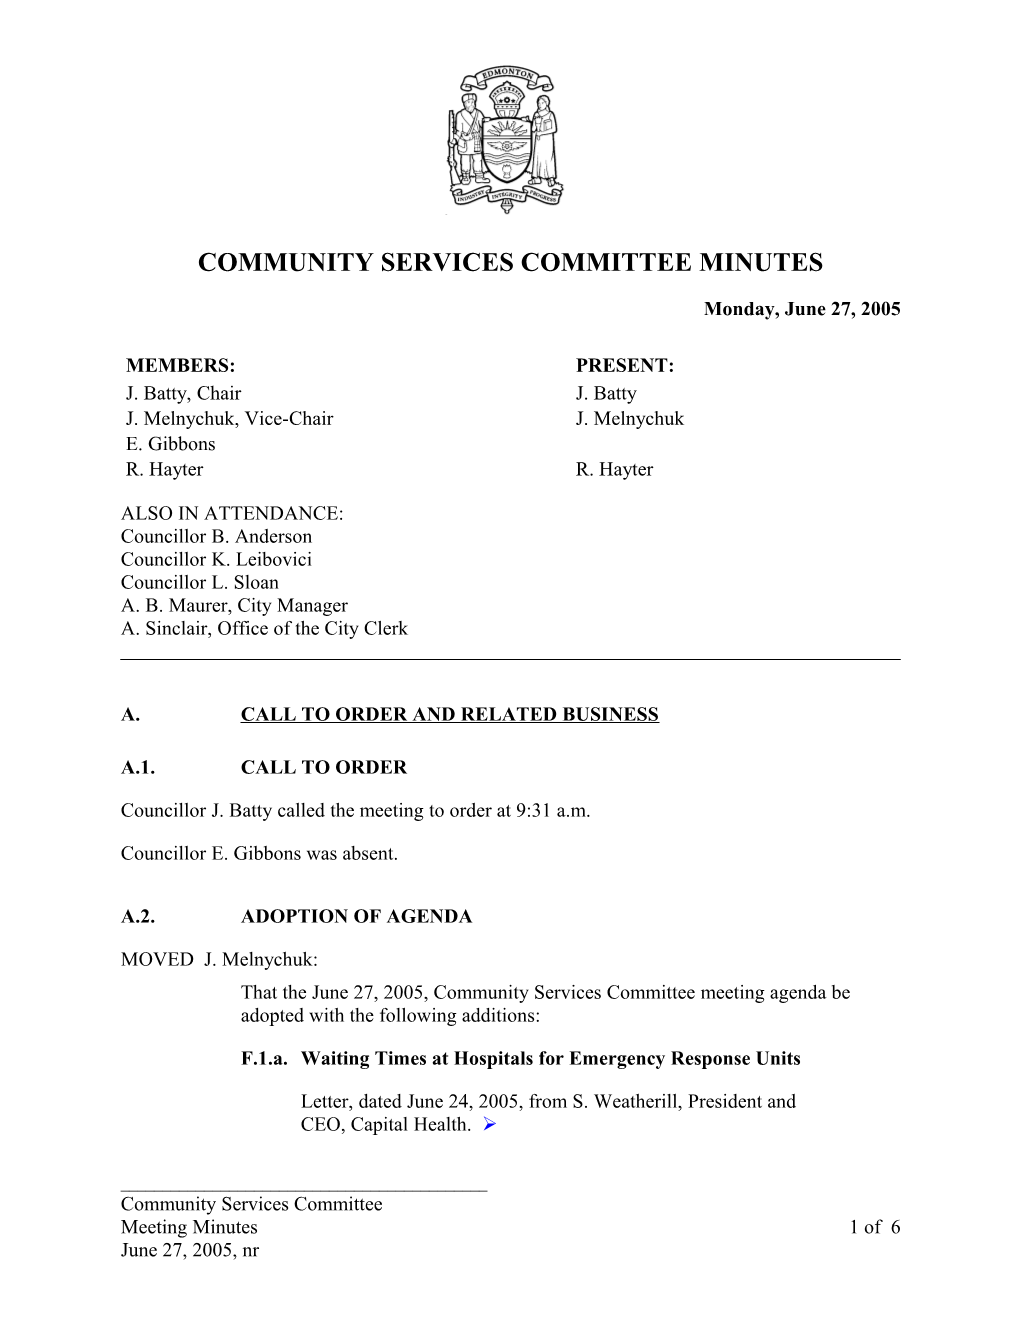 Minutes for Community Services Committee June 27, 2005 Meeting